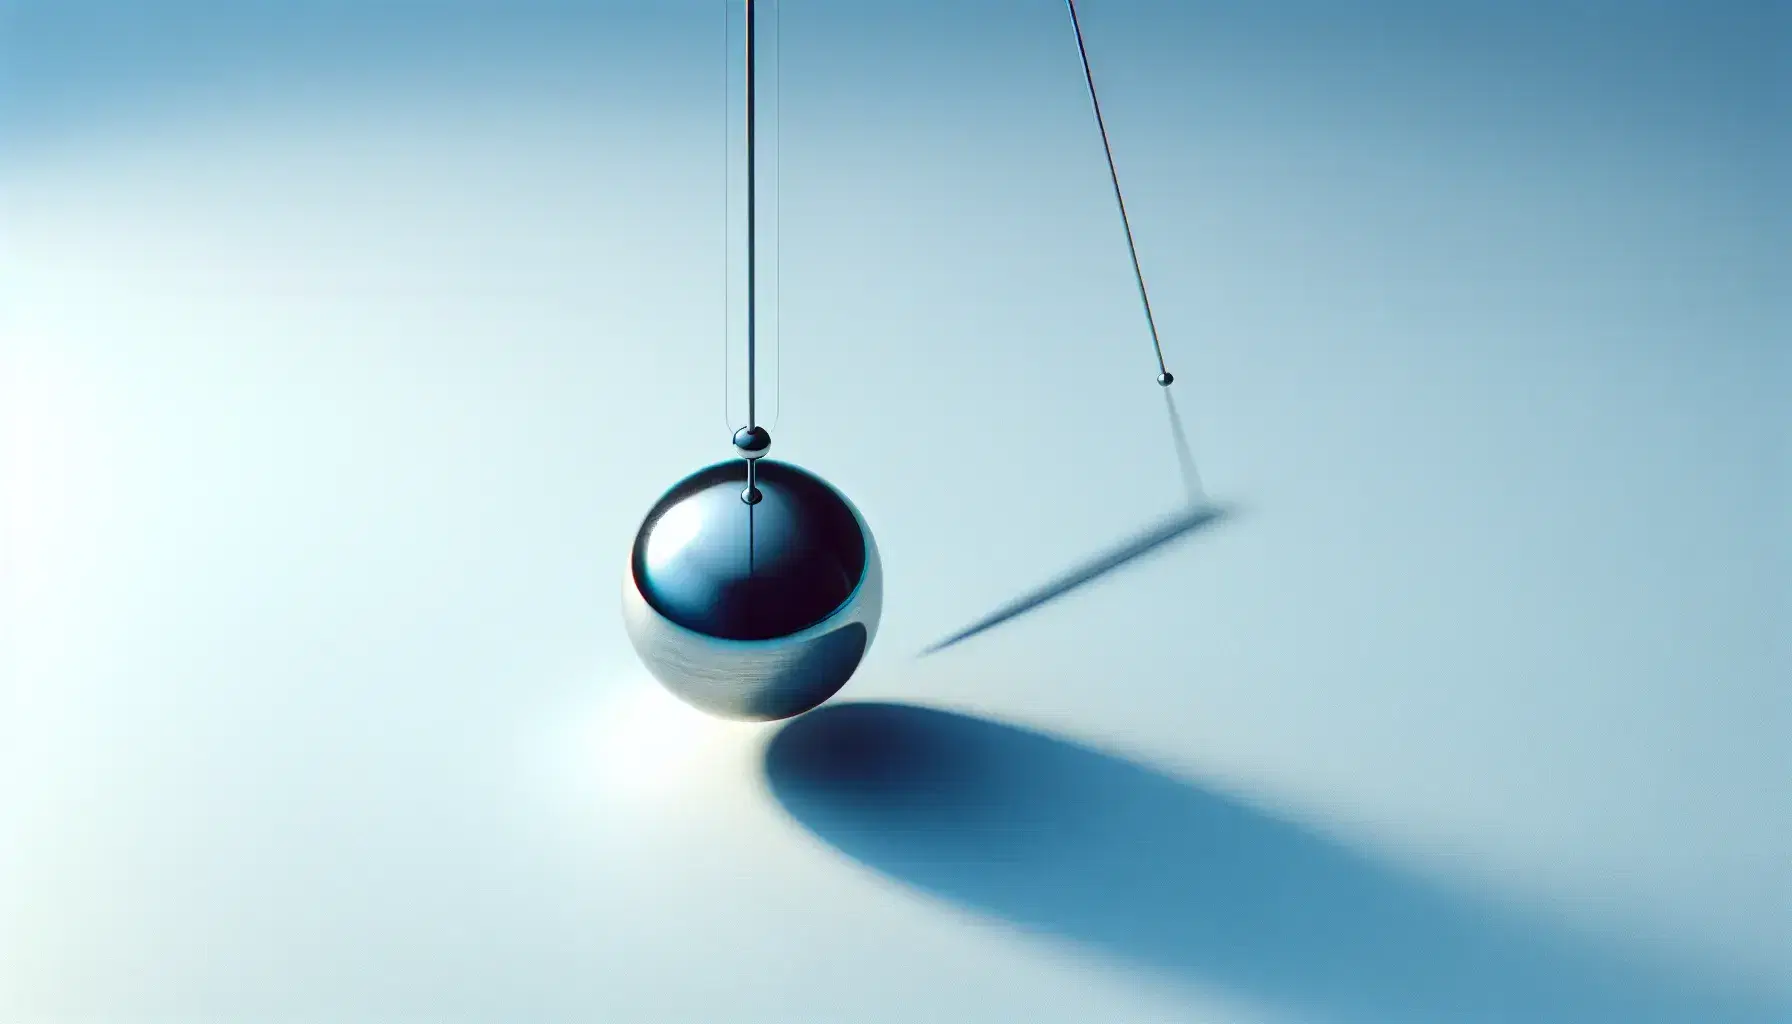 Simple pendulum with polished steel bob at peak arc against a gradient light blue background, reflecting light with a soft shadow to the right.